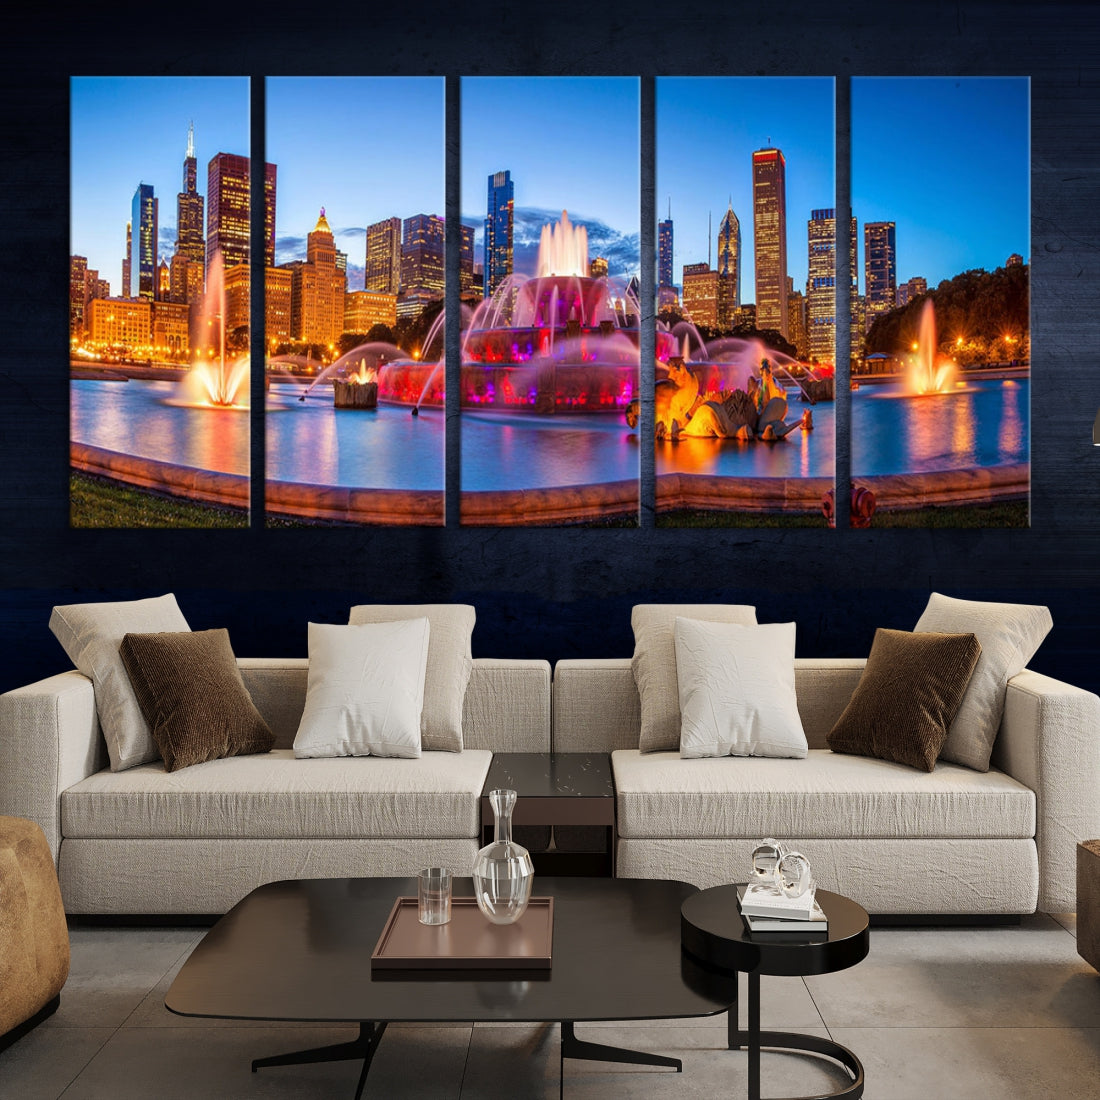 Chicago City Colorful Lights Night Skyline Cityscape View Large Wall Art Canvas Print